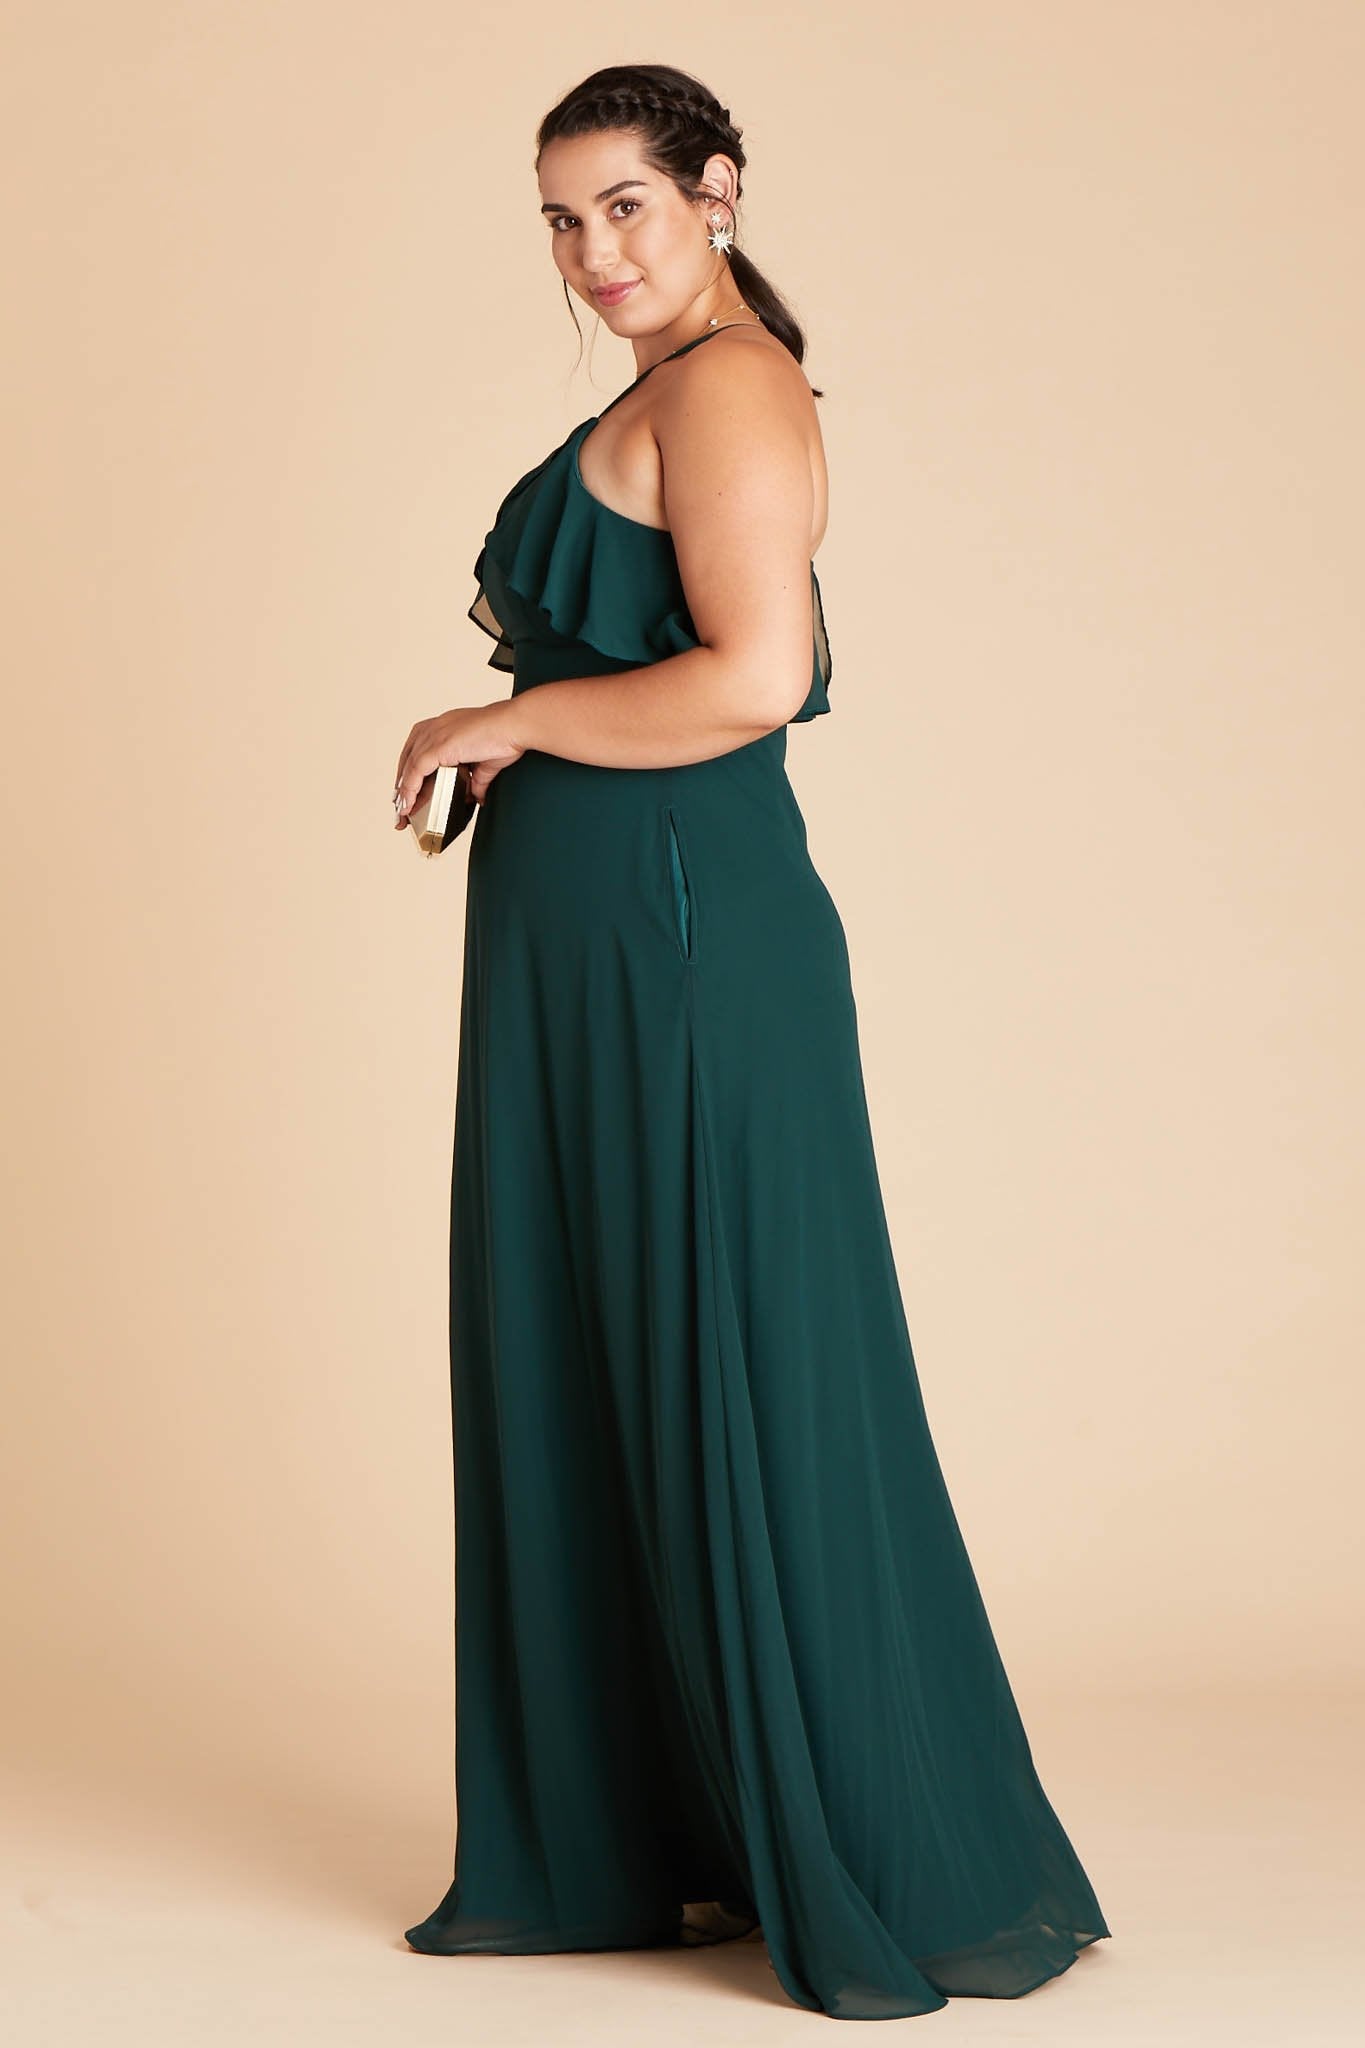 Jules convertible plus size bridesmaid dress in emerald green chiffon by Birdy Grey, side view